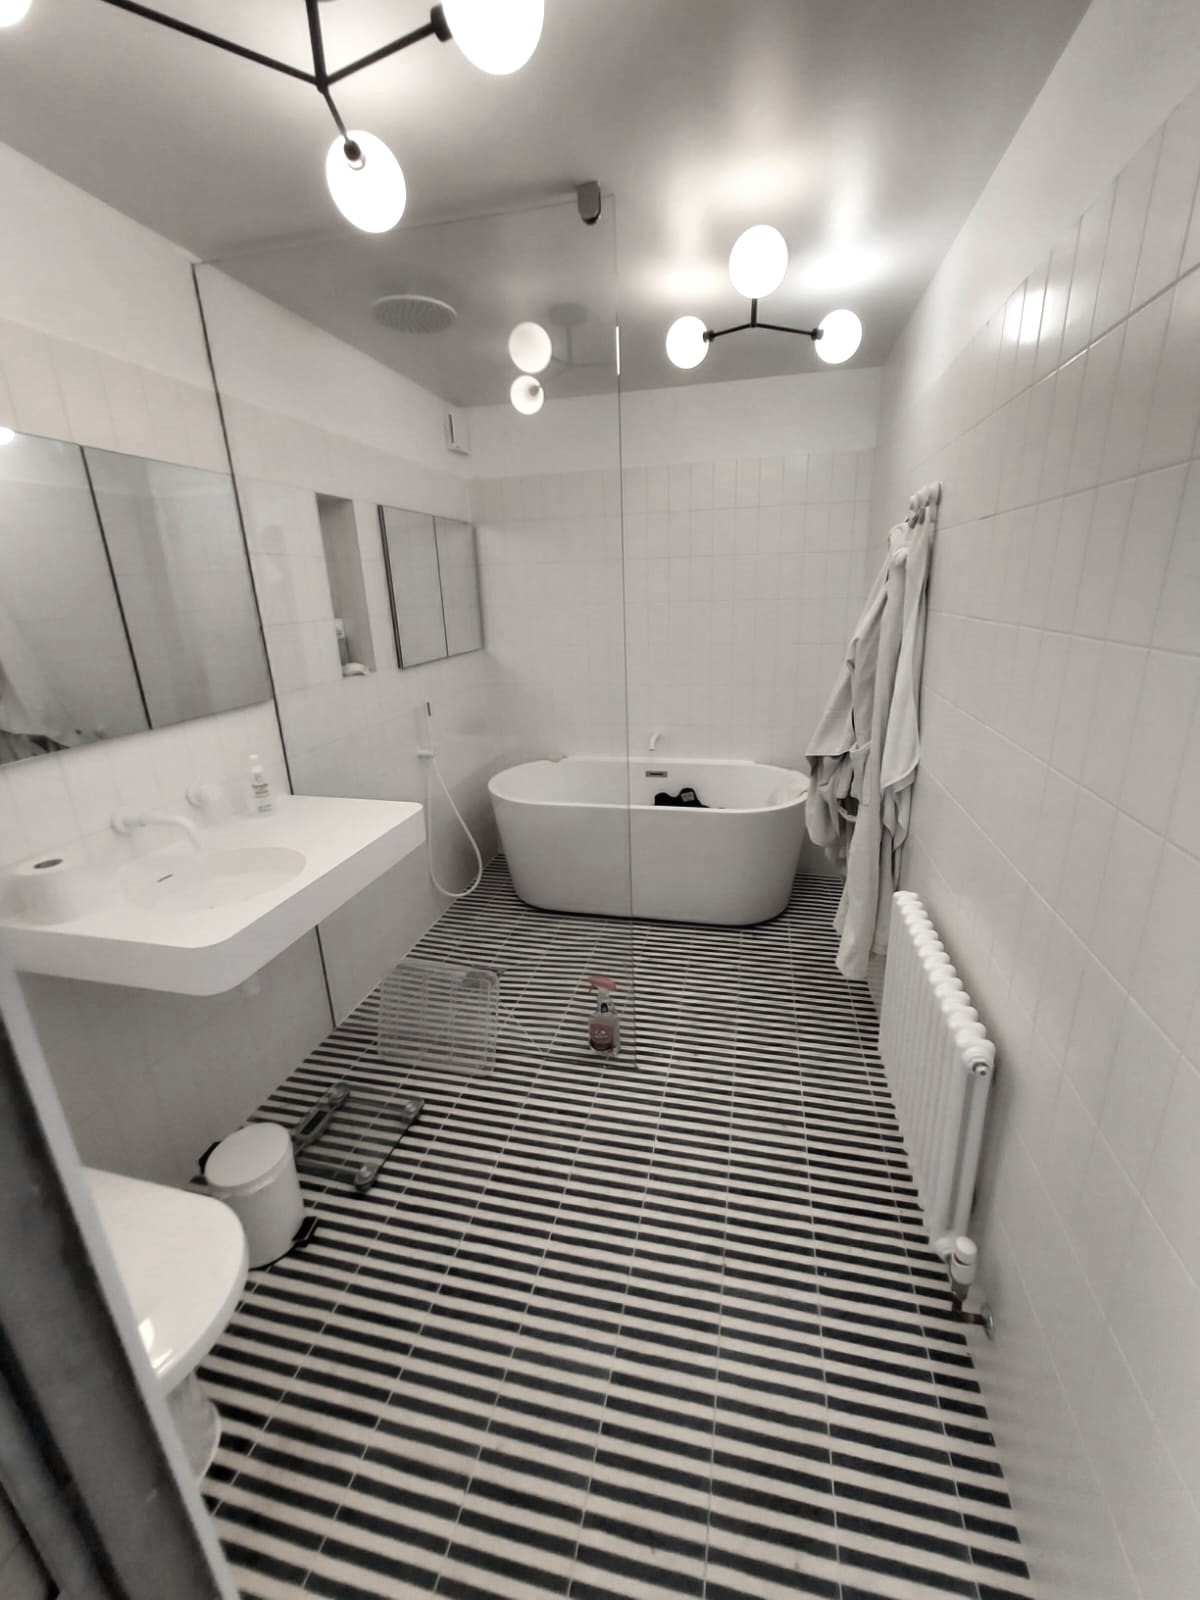 Standalone bath, shower, toilet and sink in the bathroom